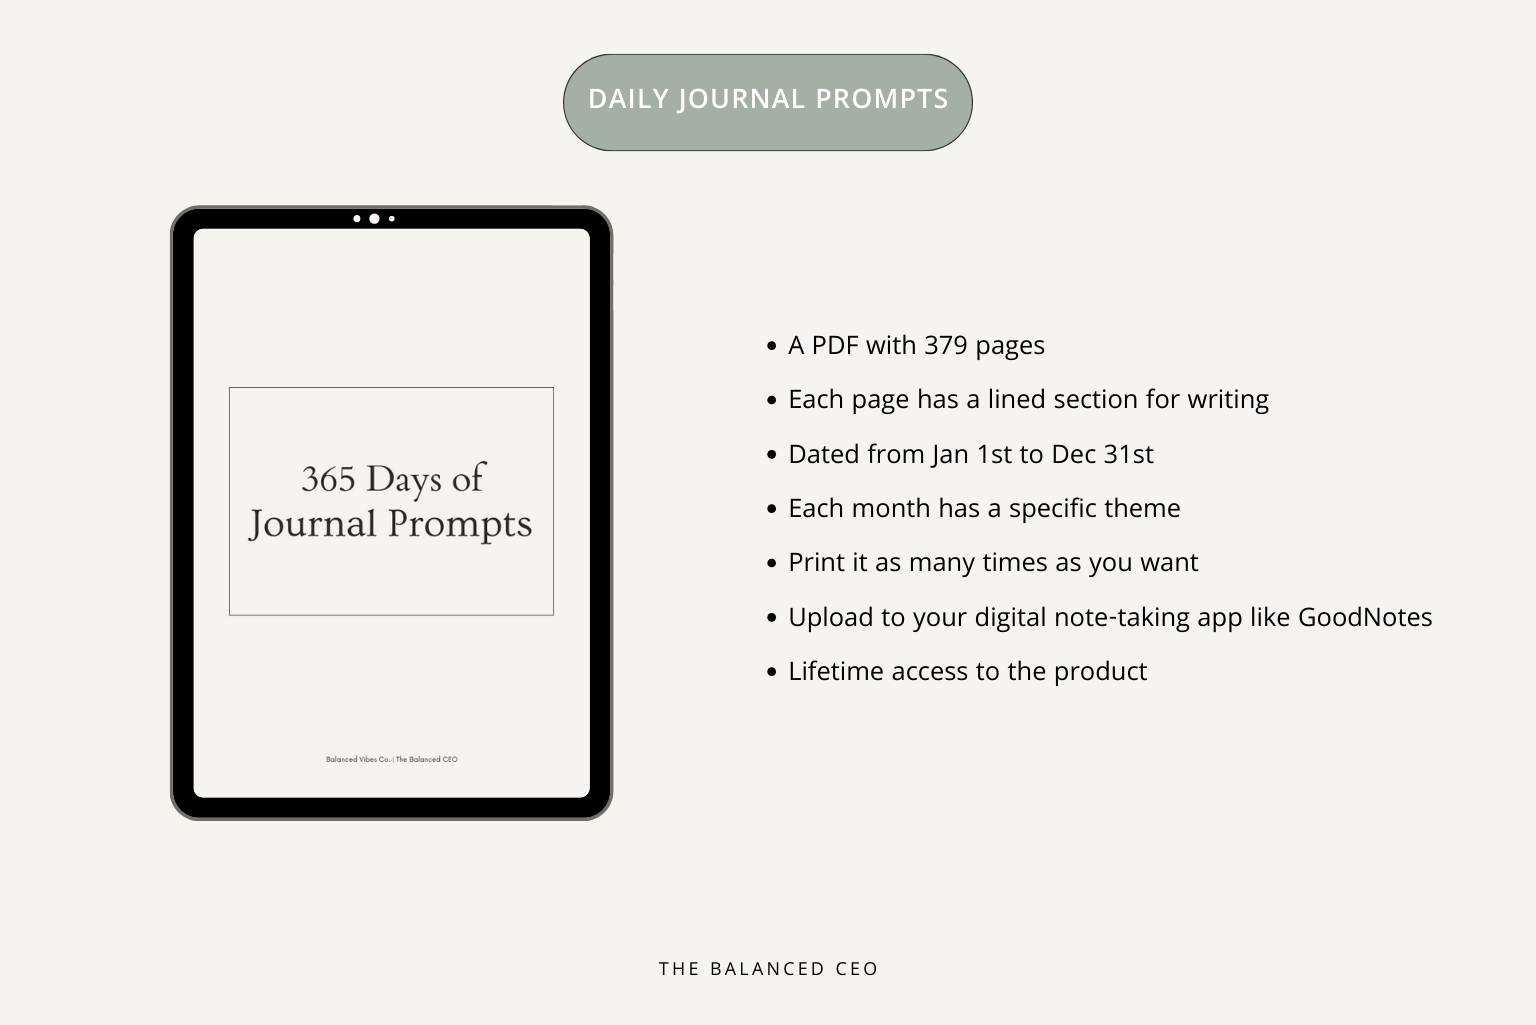 Daily journal prompts